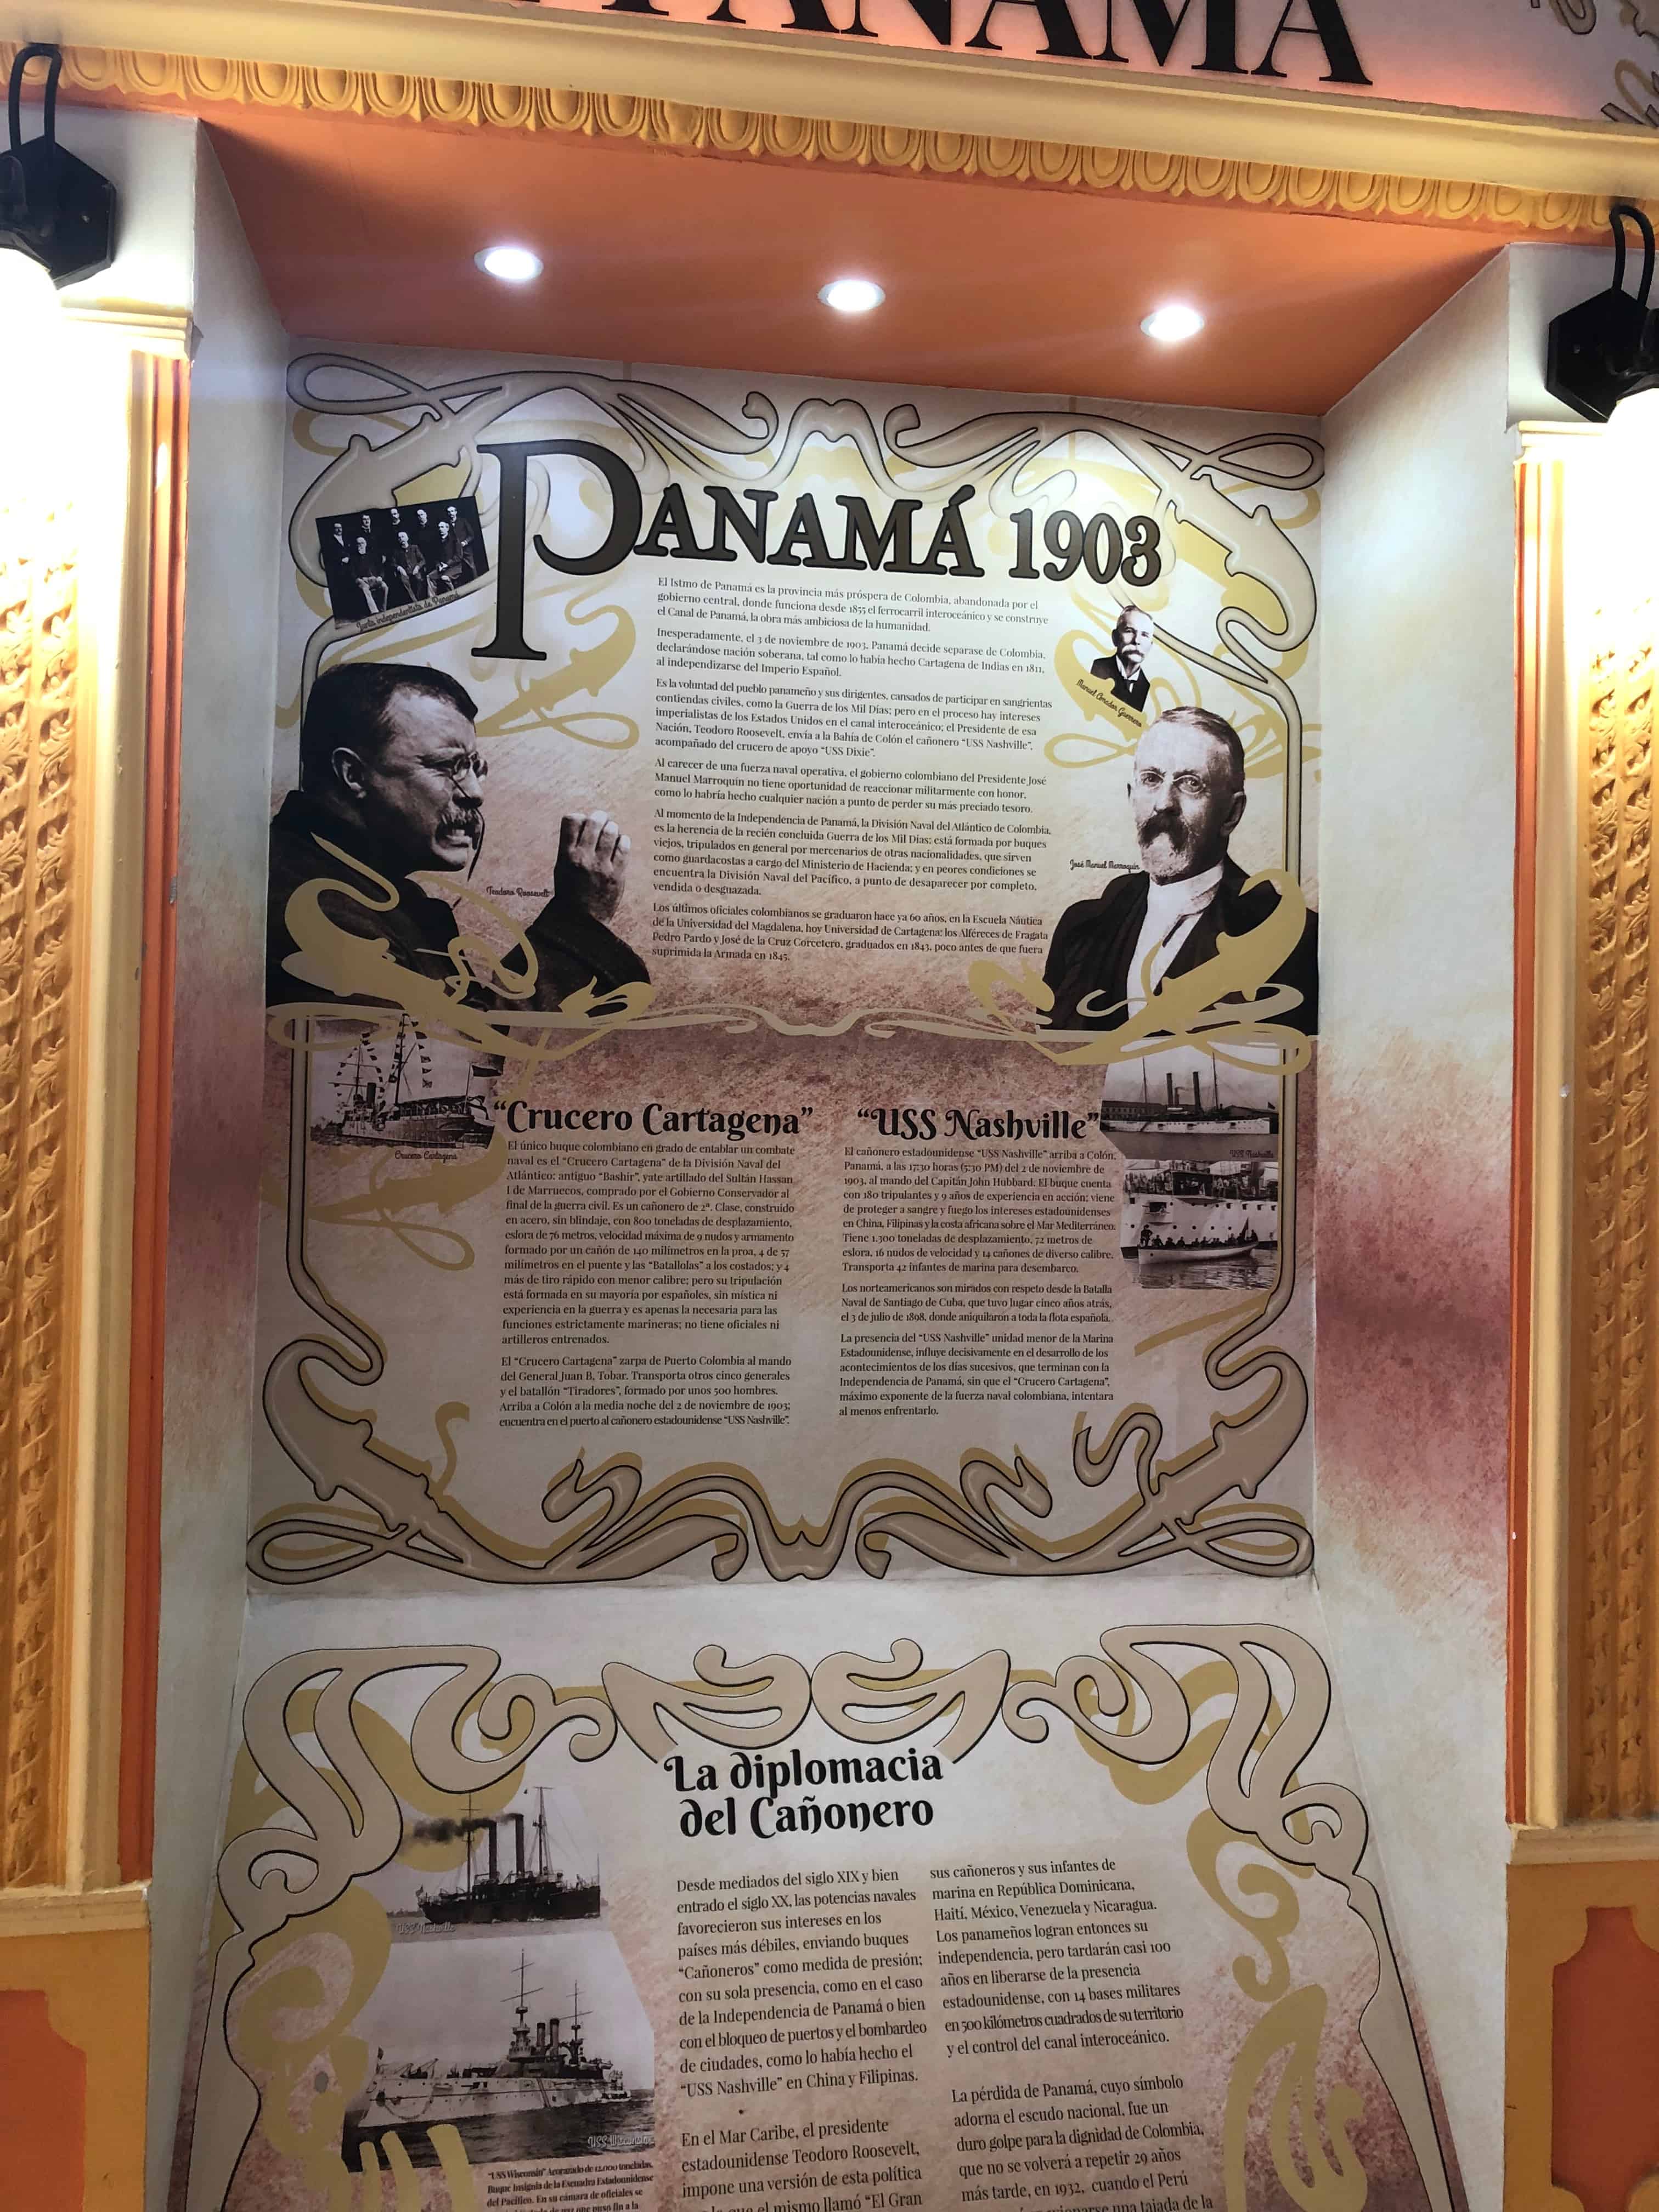 Secession of Panama at the Caribbean Naval Museum in Cartagena, Colombia